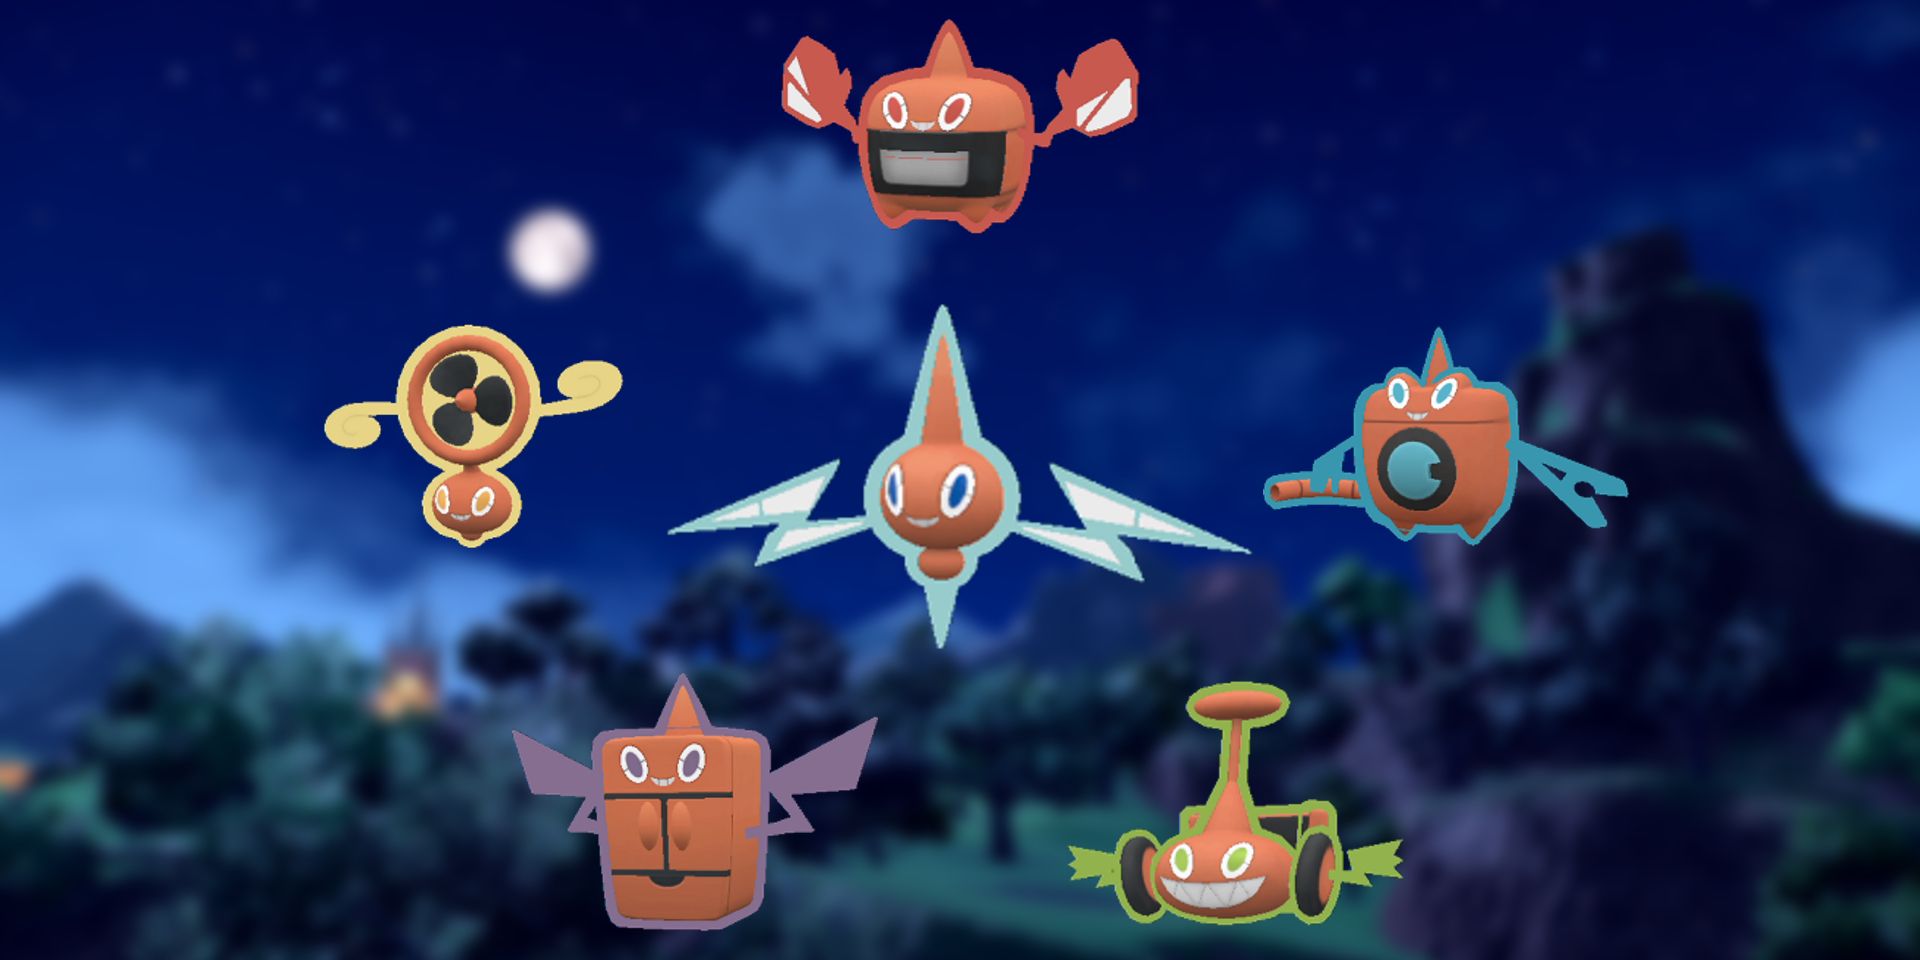 Pokemon Scarlet And Violet Rotom And All Rotom Appliance Forms On Paldea Night Landscape